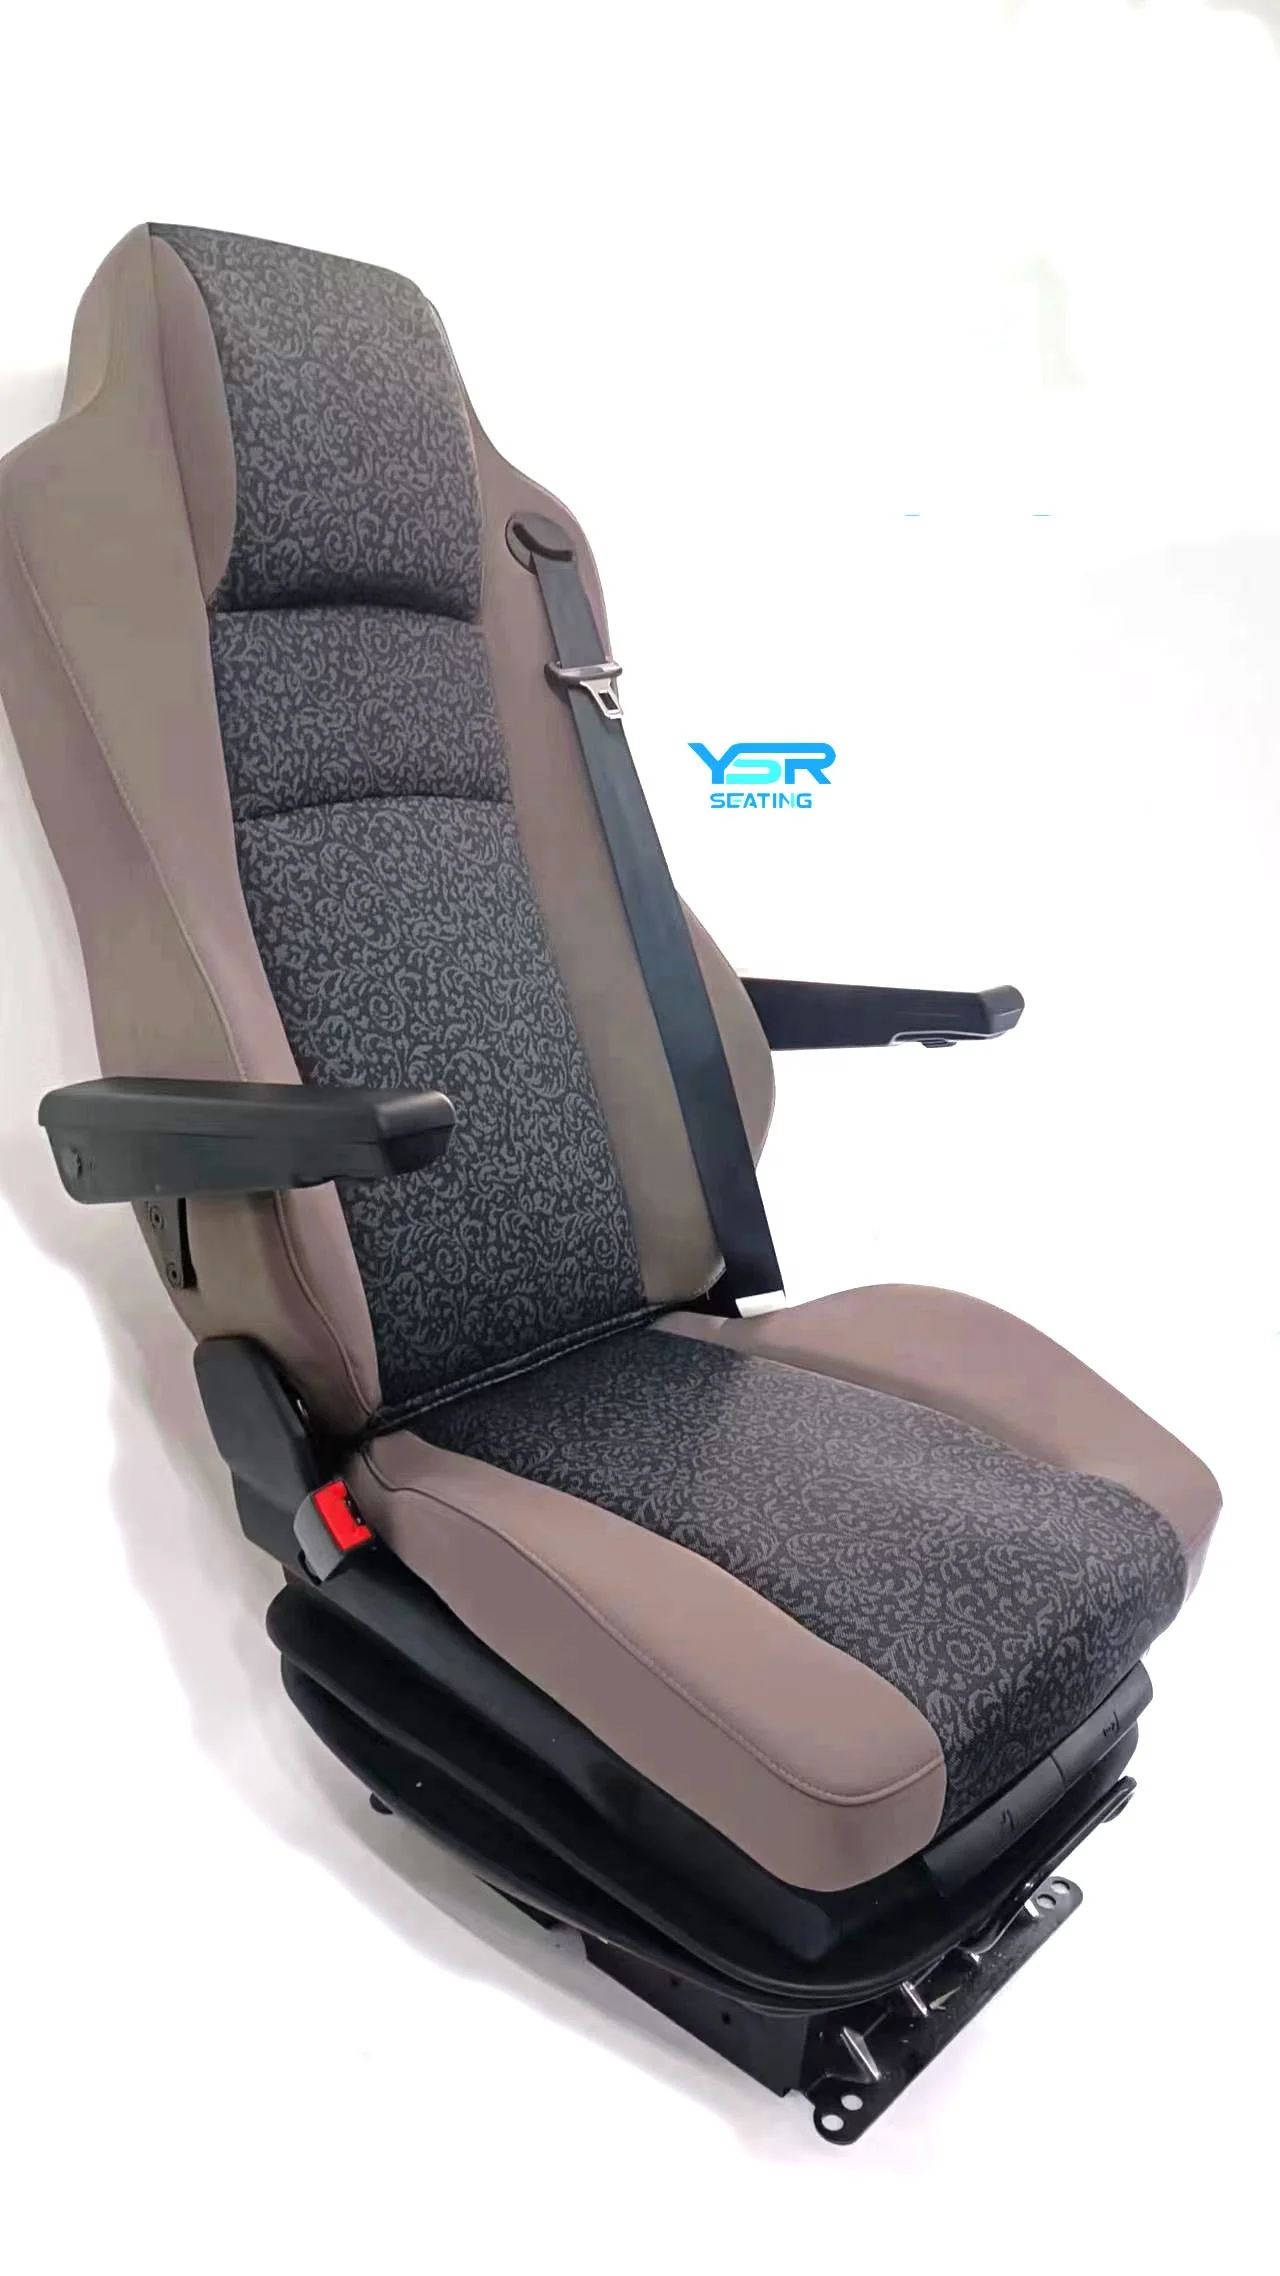 KAB GSX3000 truck & Coach seat.Great Prices !!